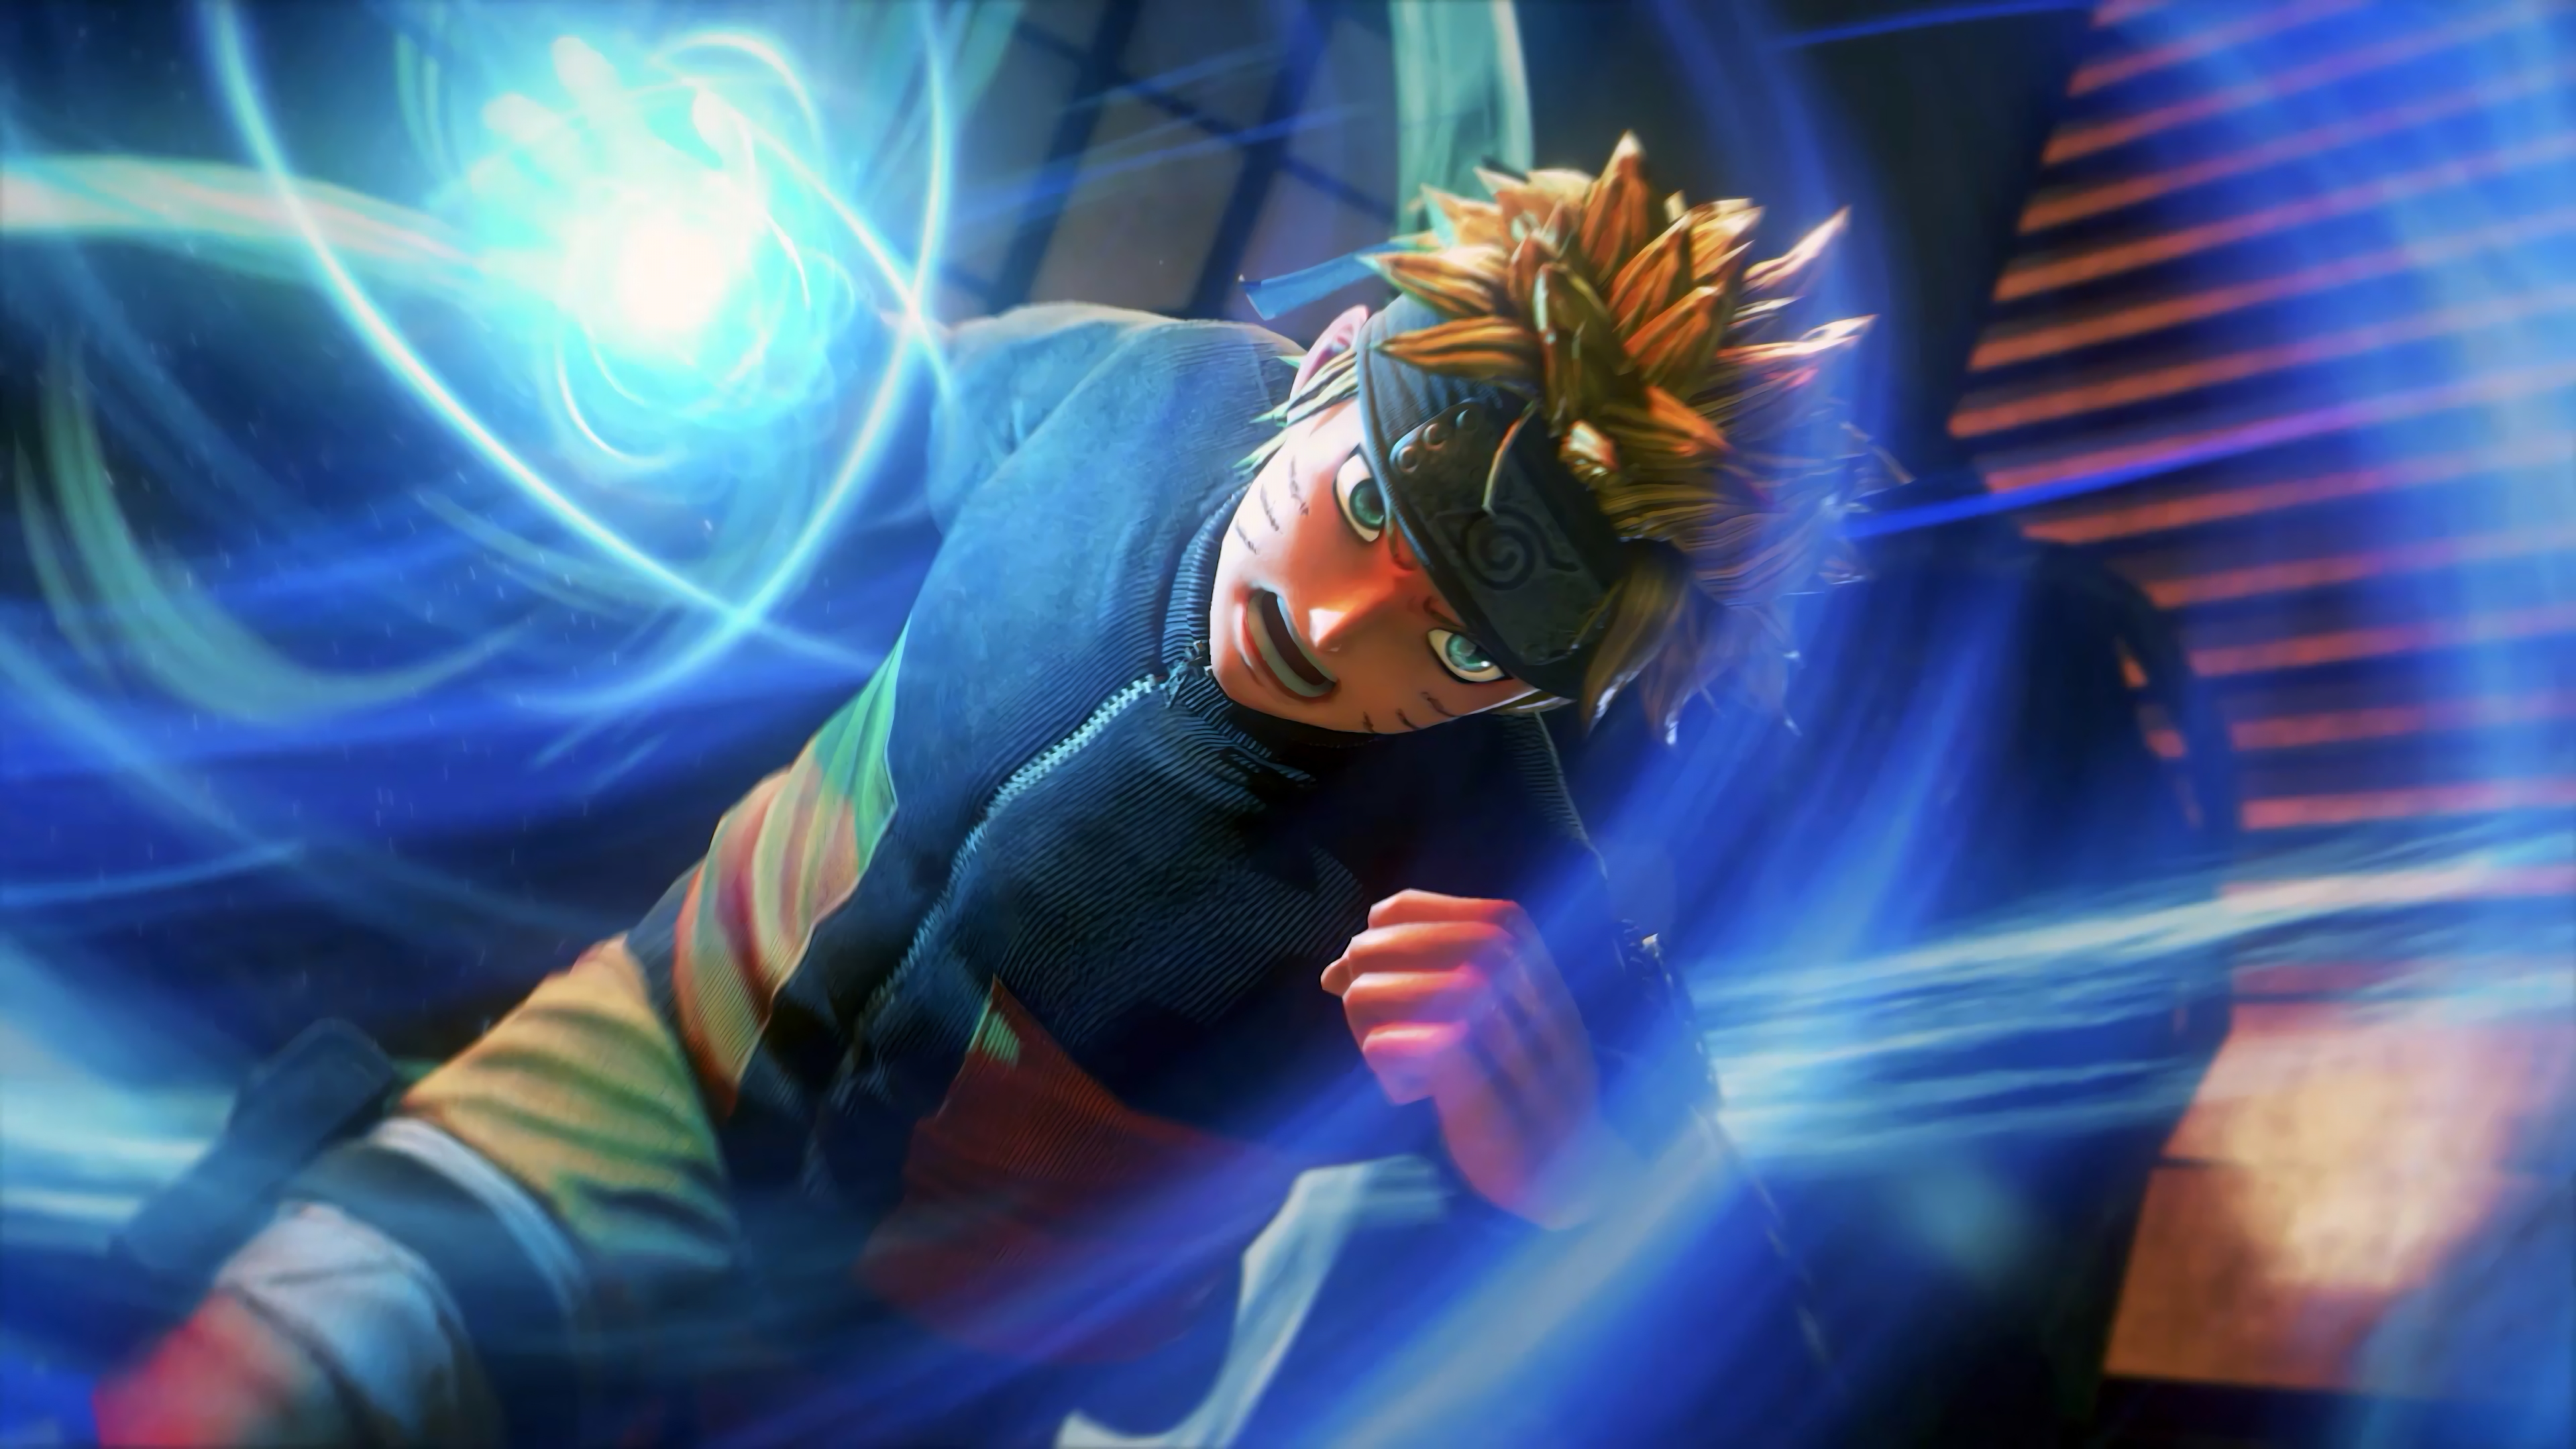 Jump Force Wallpapers Pictures Images